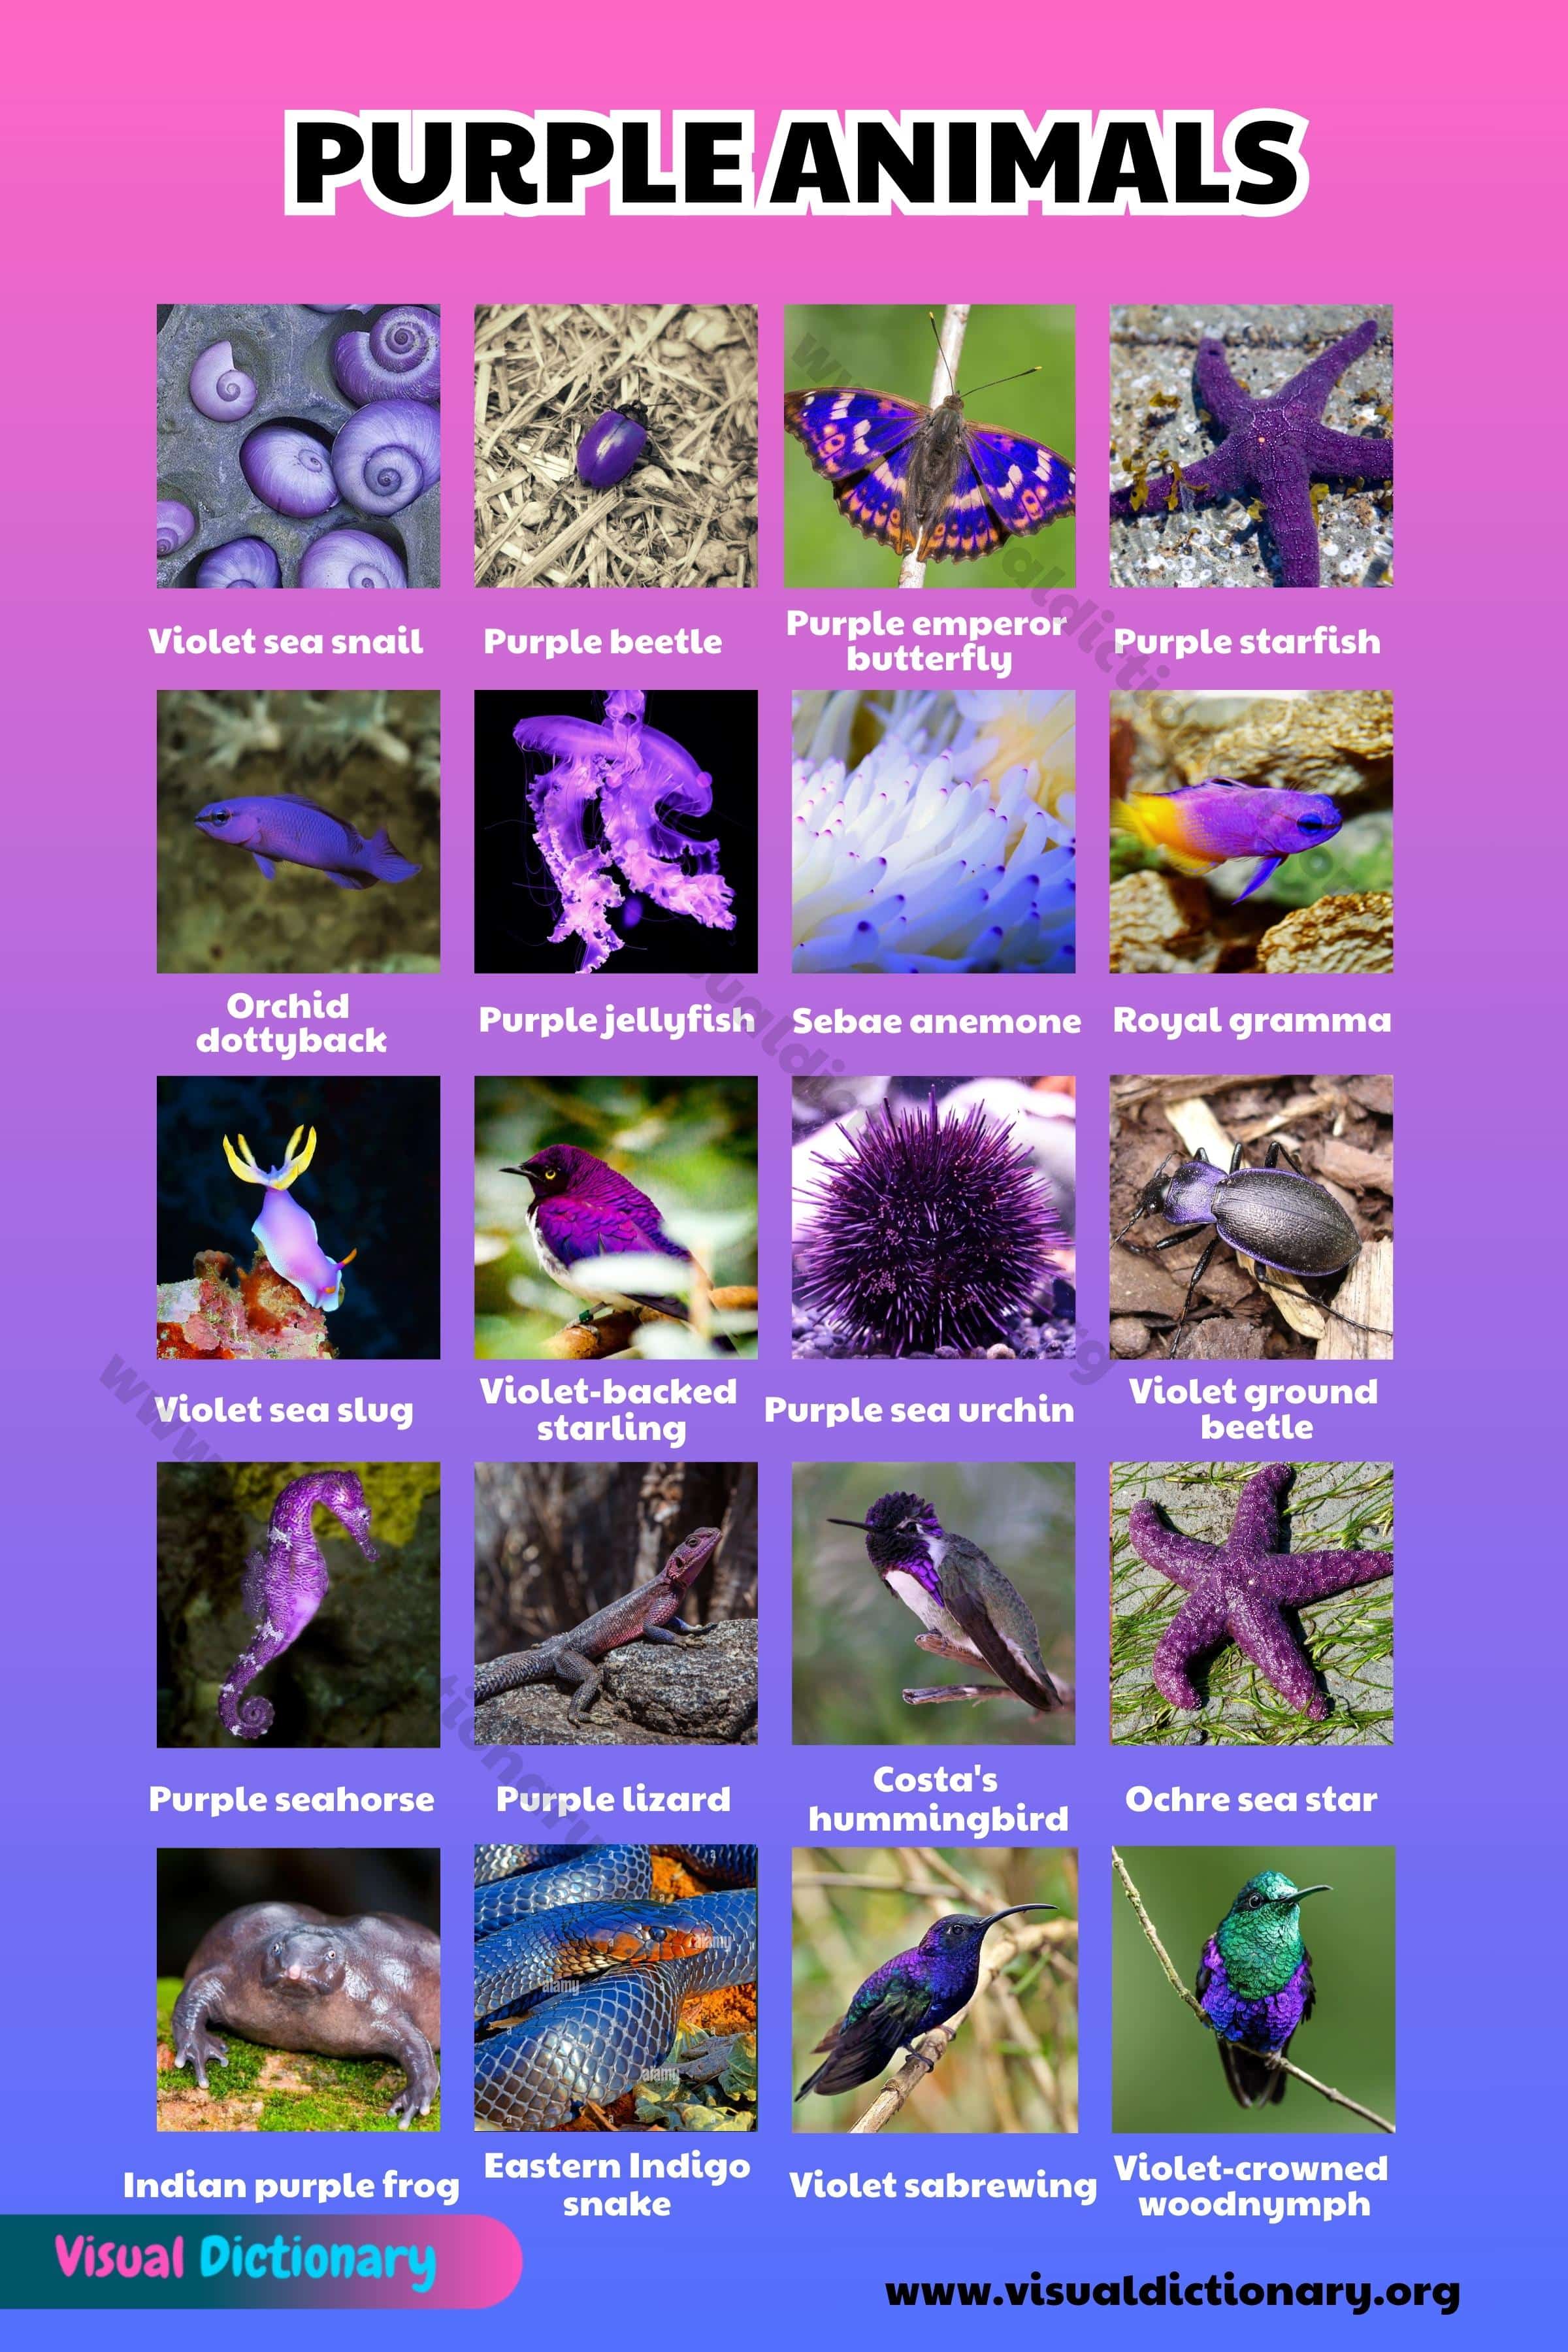 List of Purple Animals: 23 Most Unusual and Beautiful Creatures in the World